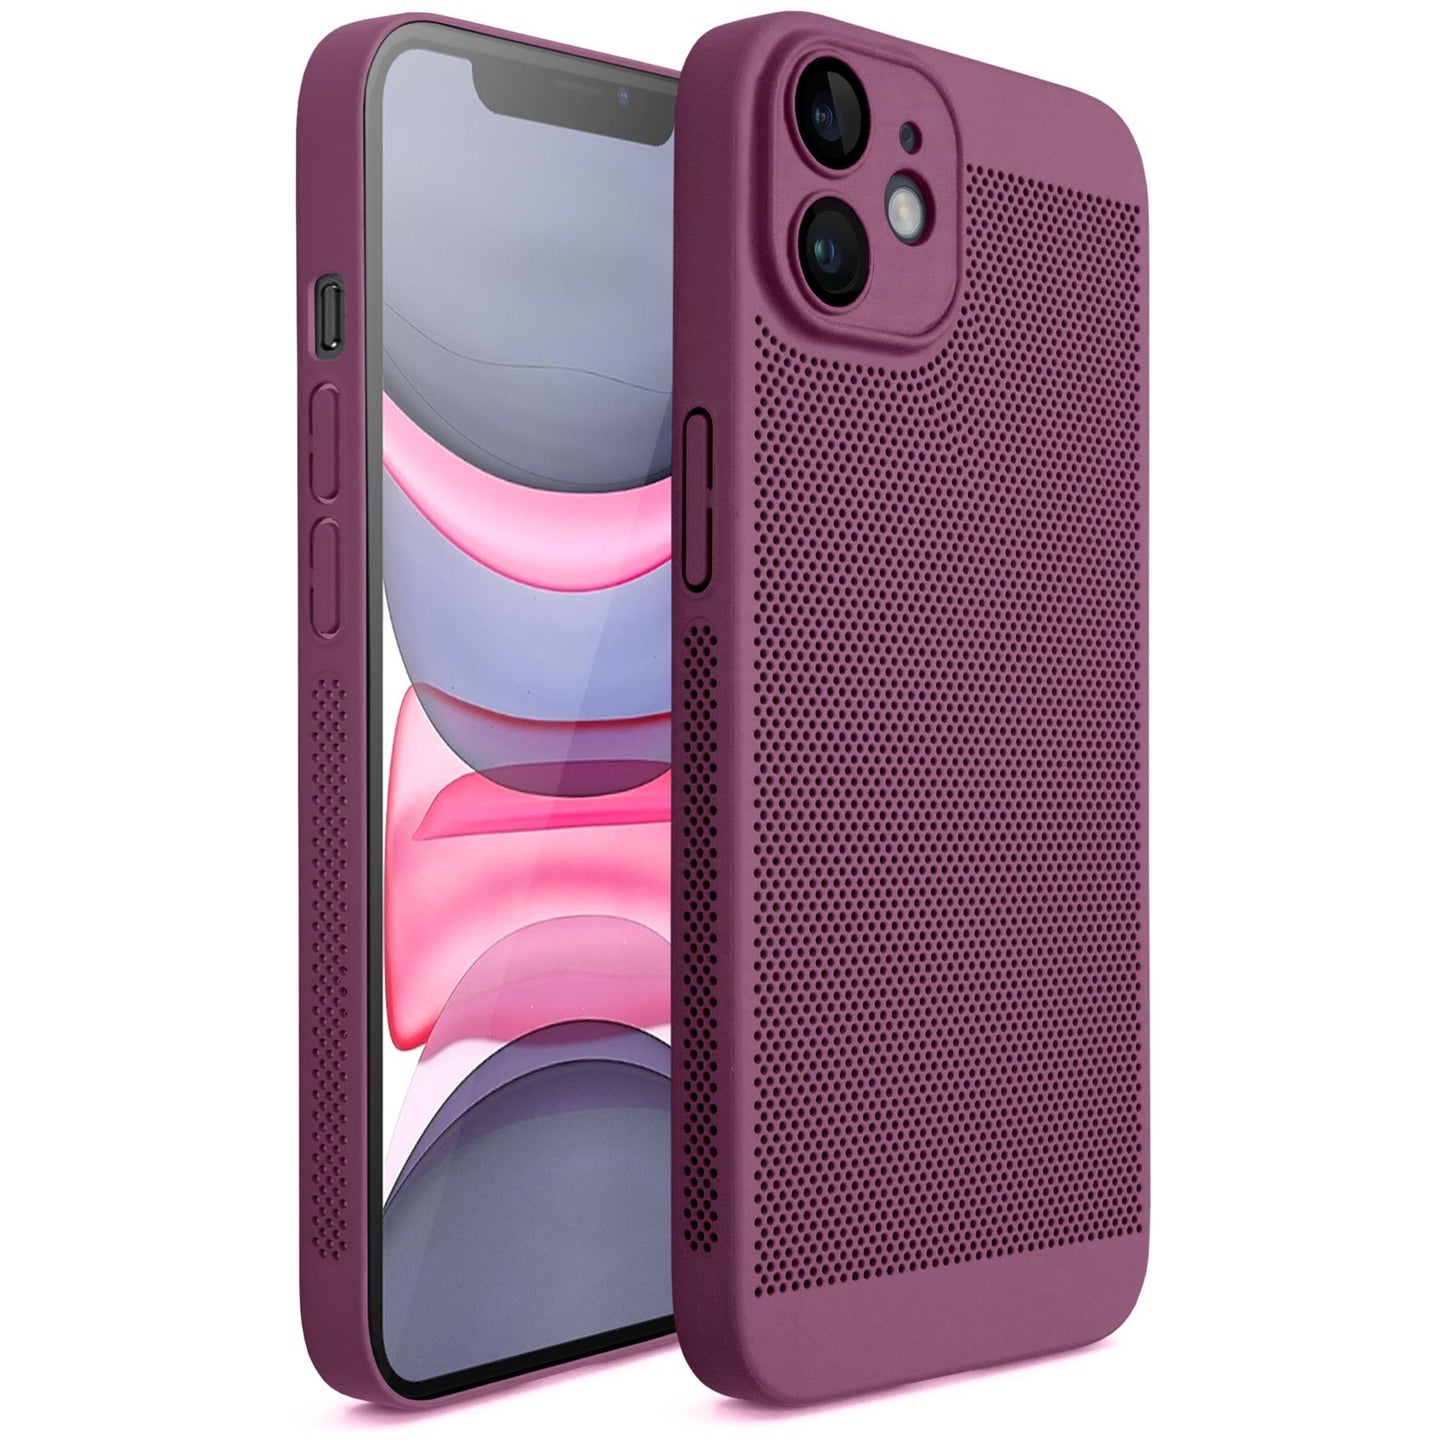 Moozy VentiGuard Phone Case for iPhone 11, Purple, 6.1-inch - Breathable Cover with Perforated Pattern for Air Circulation, Ventilation, Anti-Overheating Phone Case